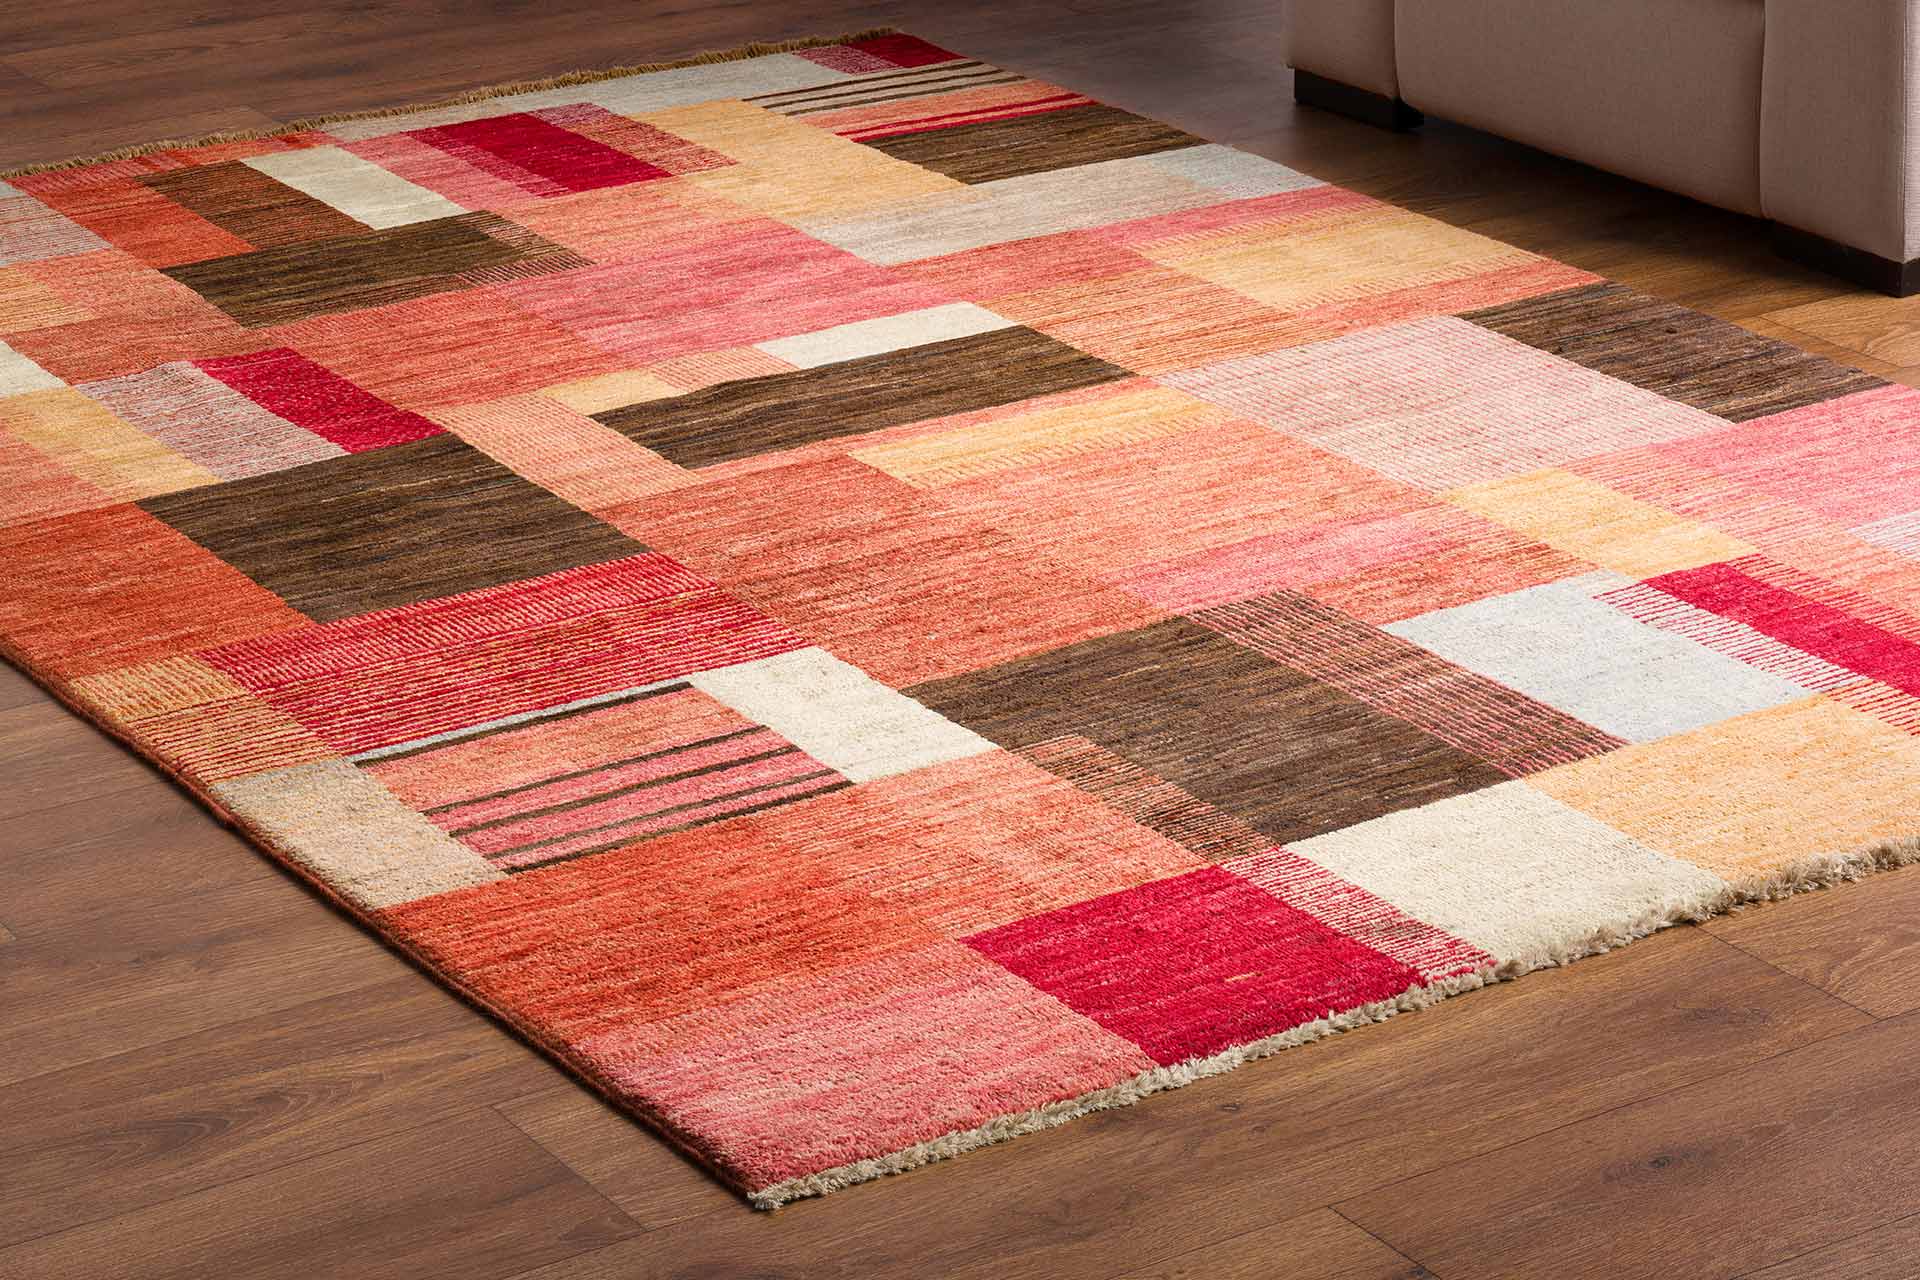 Rugs For Sale in Ashton | Buy Rugs Online | Lifestyle Carpets